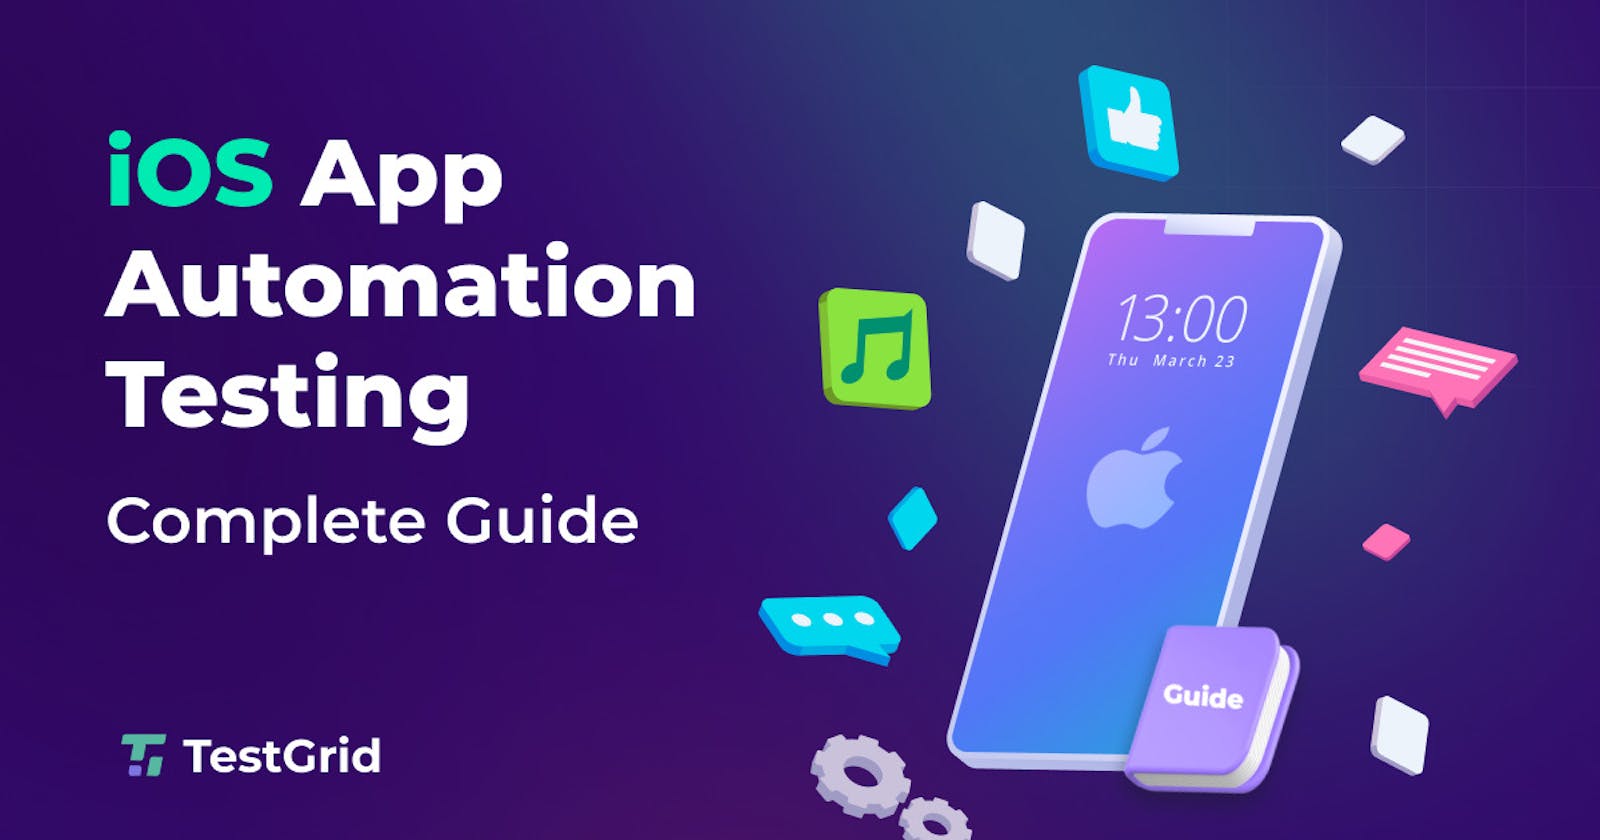 Introduction to iOS App Automation Testing